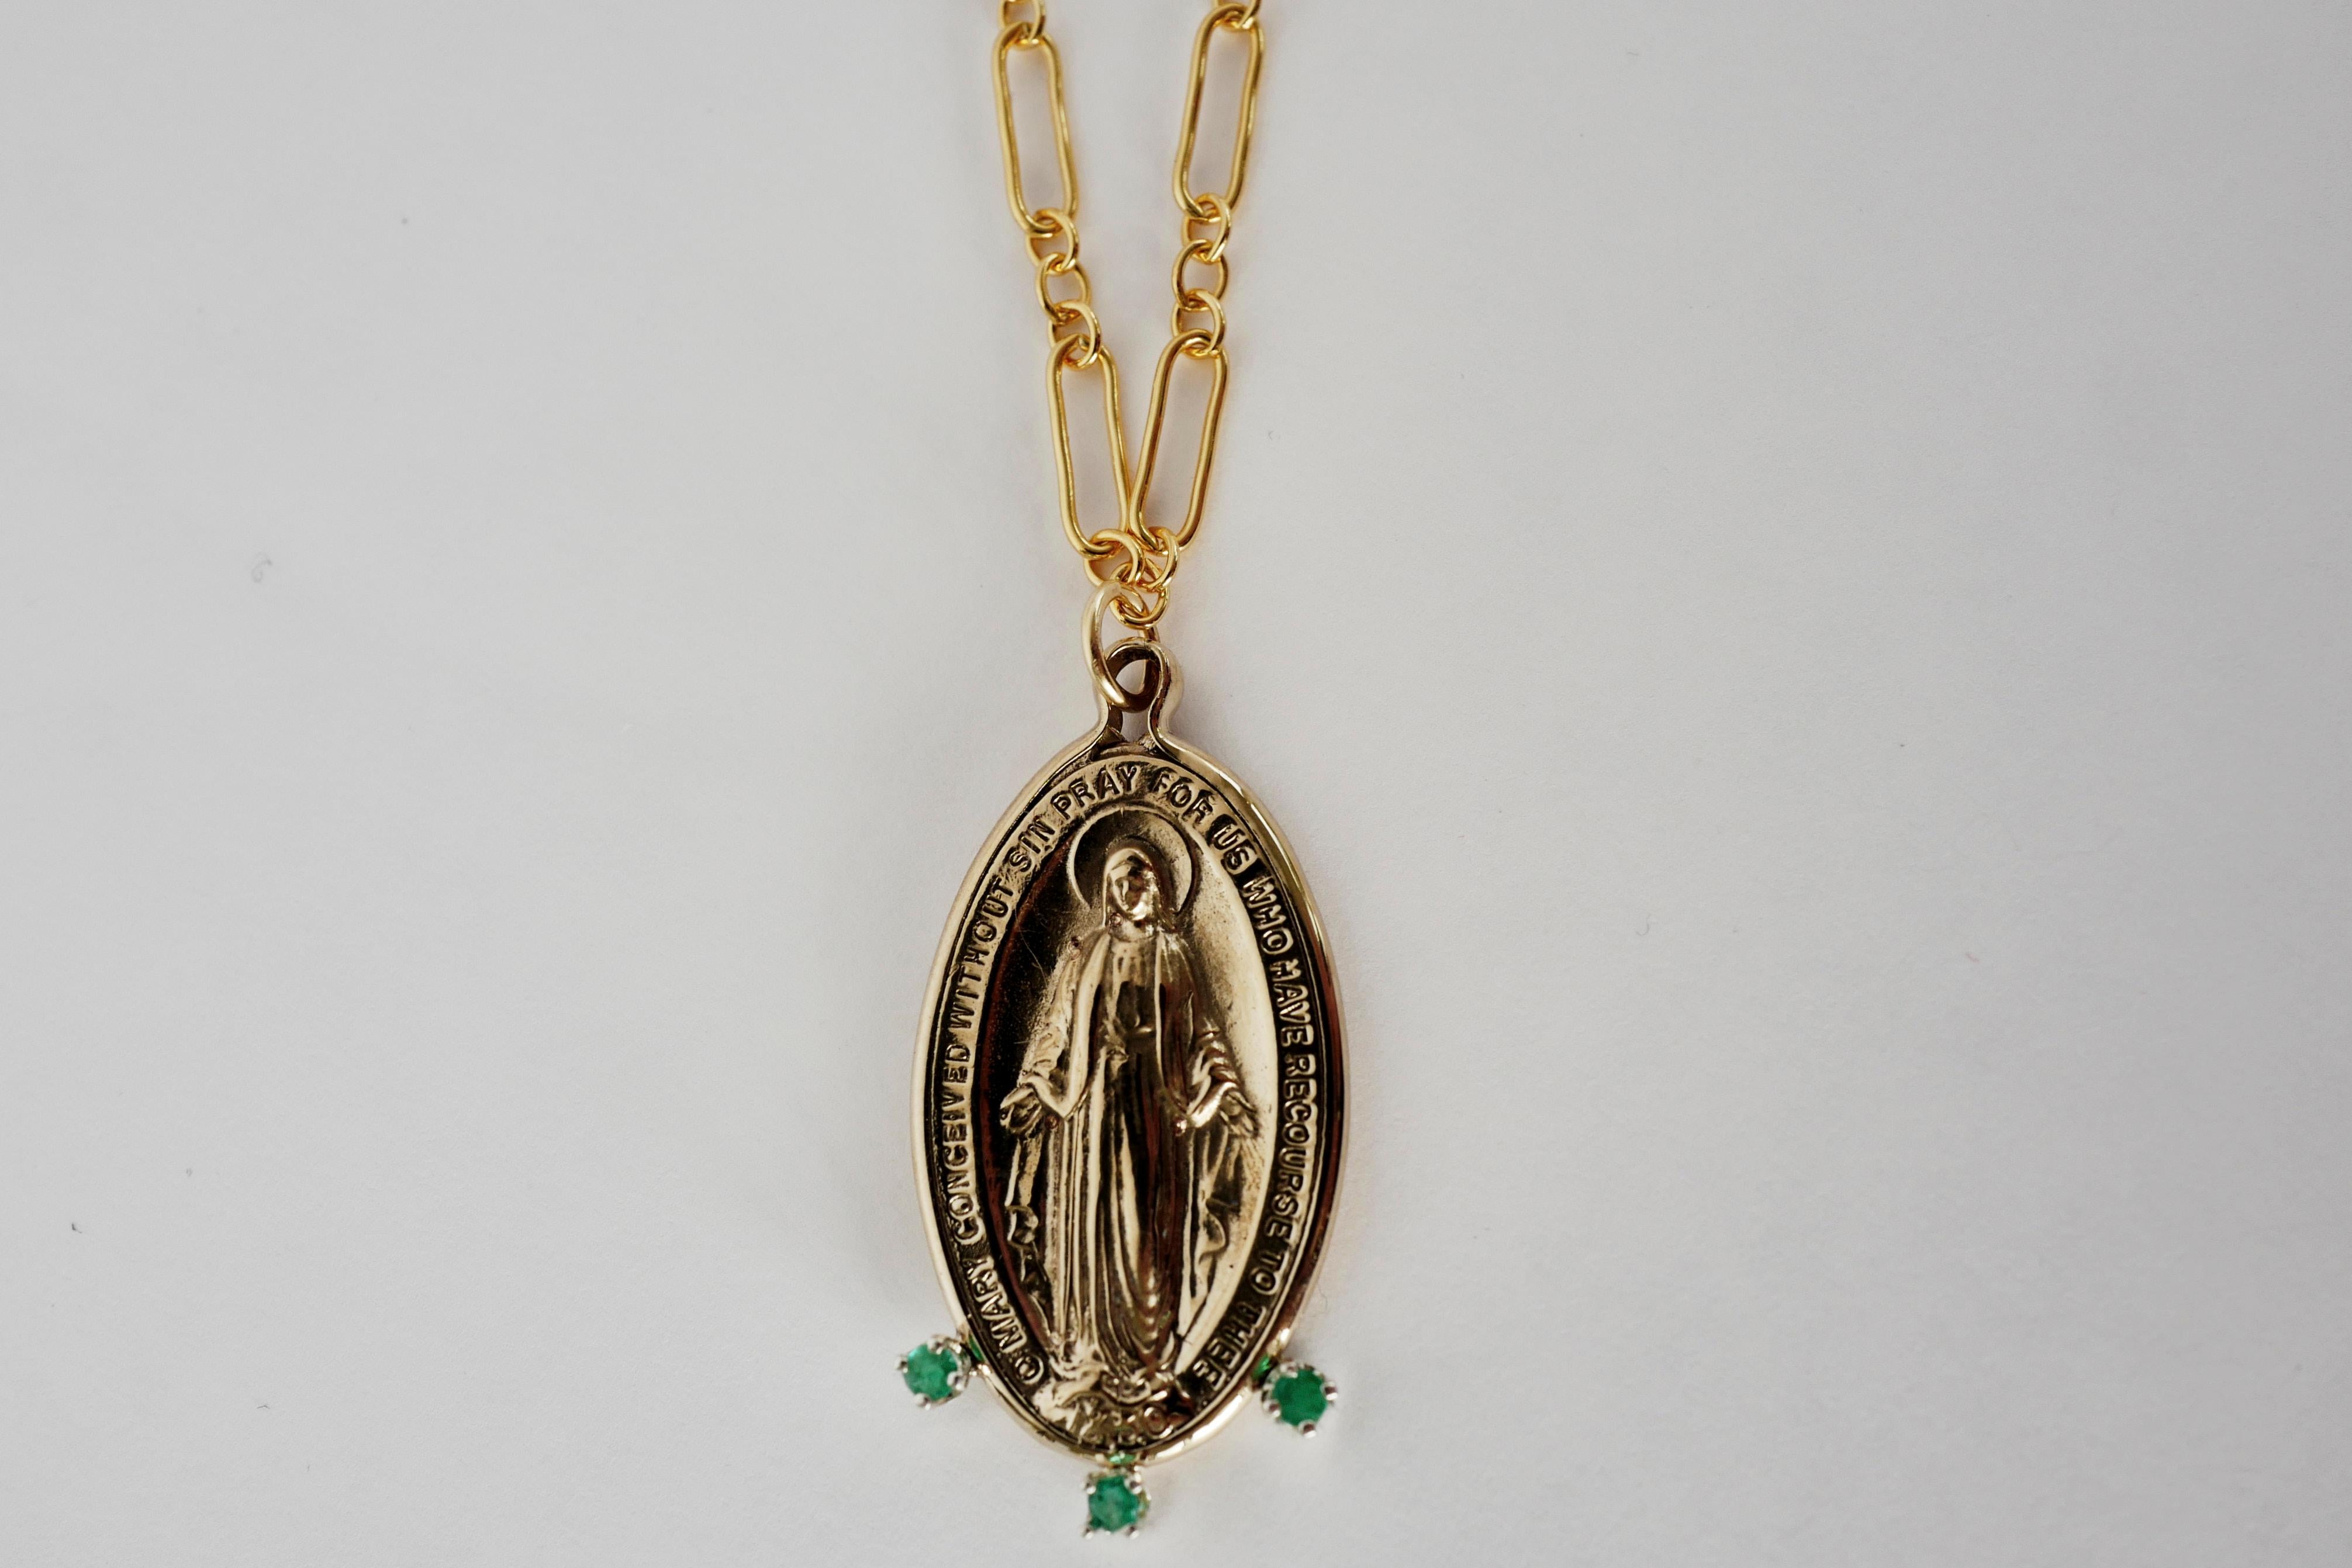 Emerald Virgin Mary Oval Medal Chain Necklace Gold Filled Chain J Dauphin For Sale 3